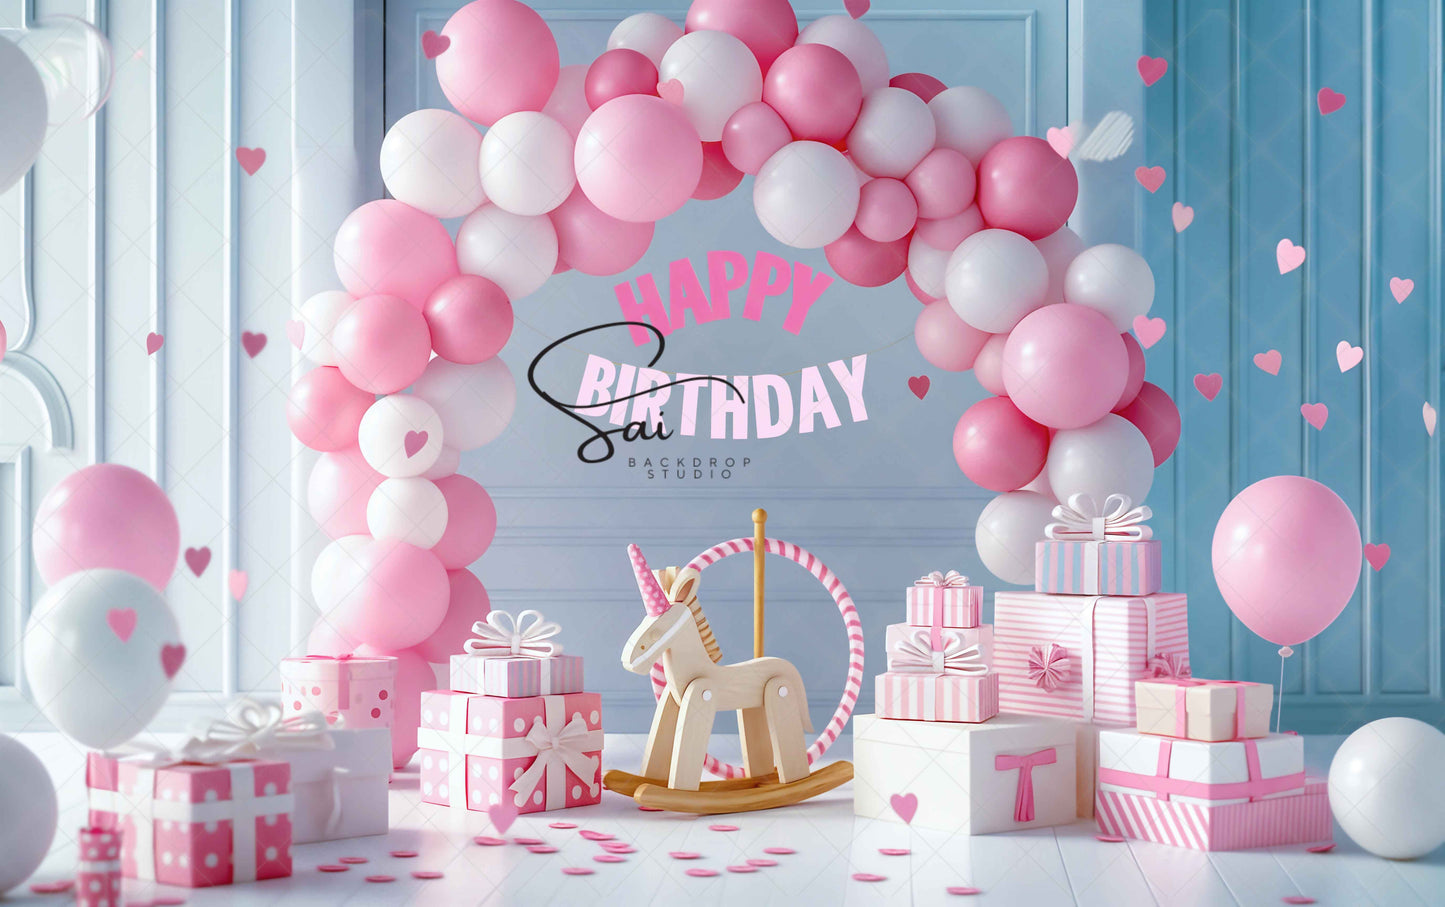 Kids Birthday Collection 10 Digital Backdrop - With Personal and Commercial License for Businesses